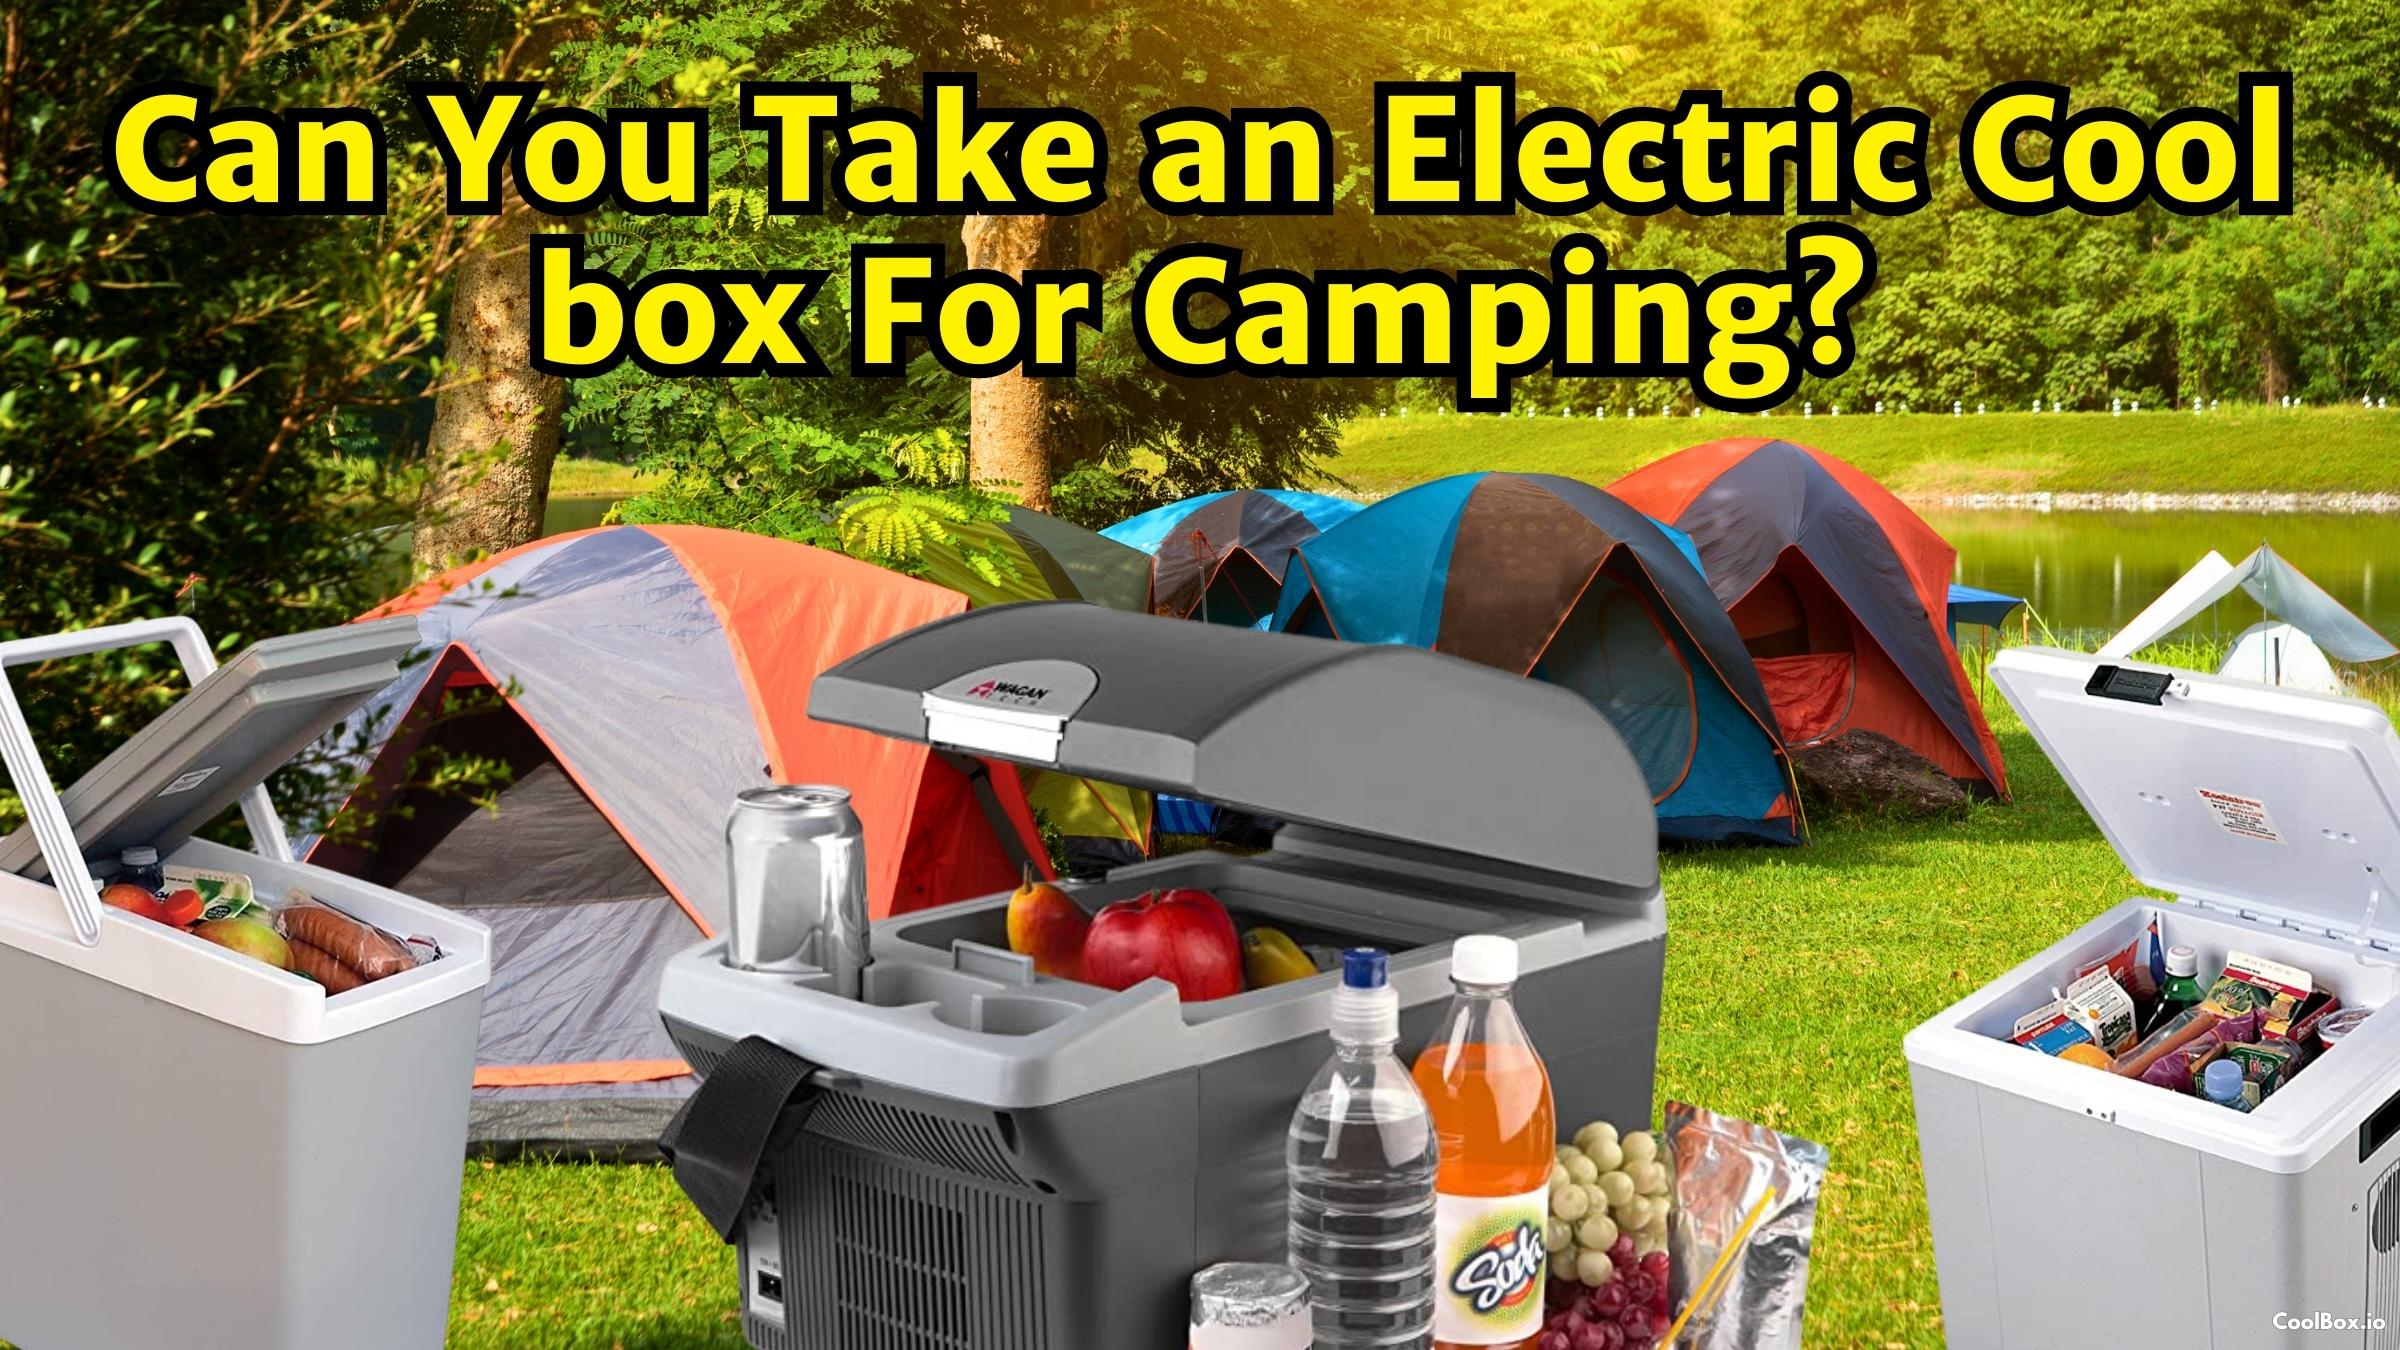 Are Electric Coolers Good For Camping?